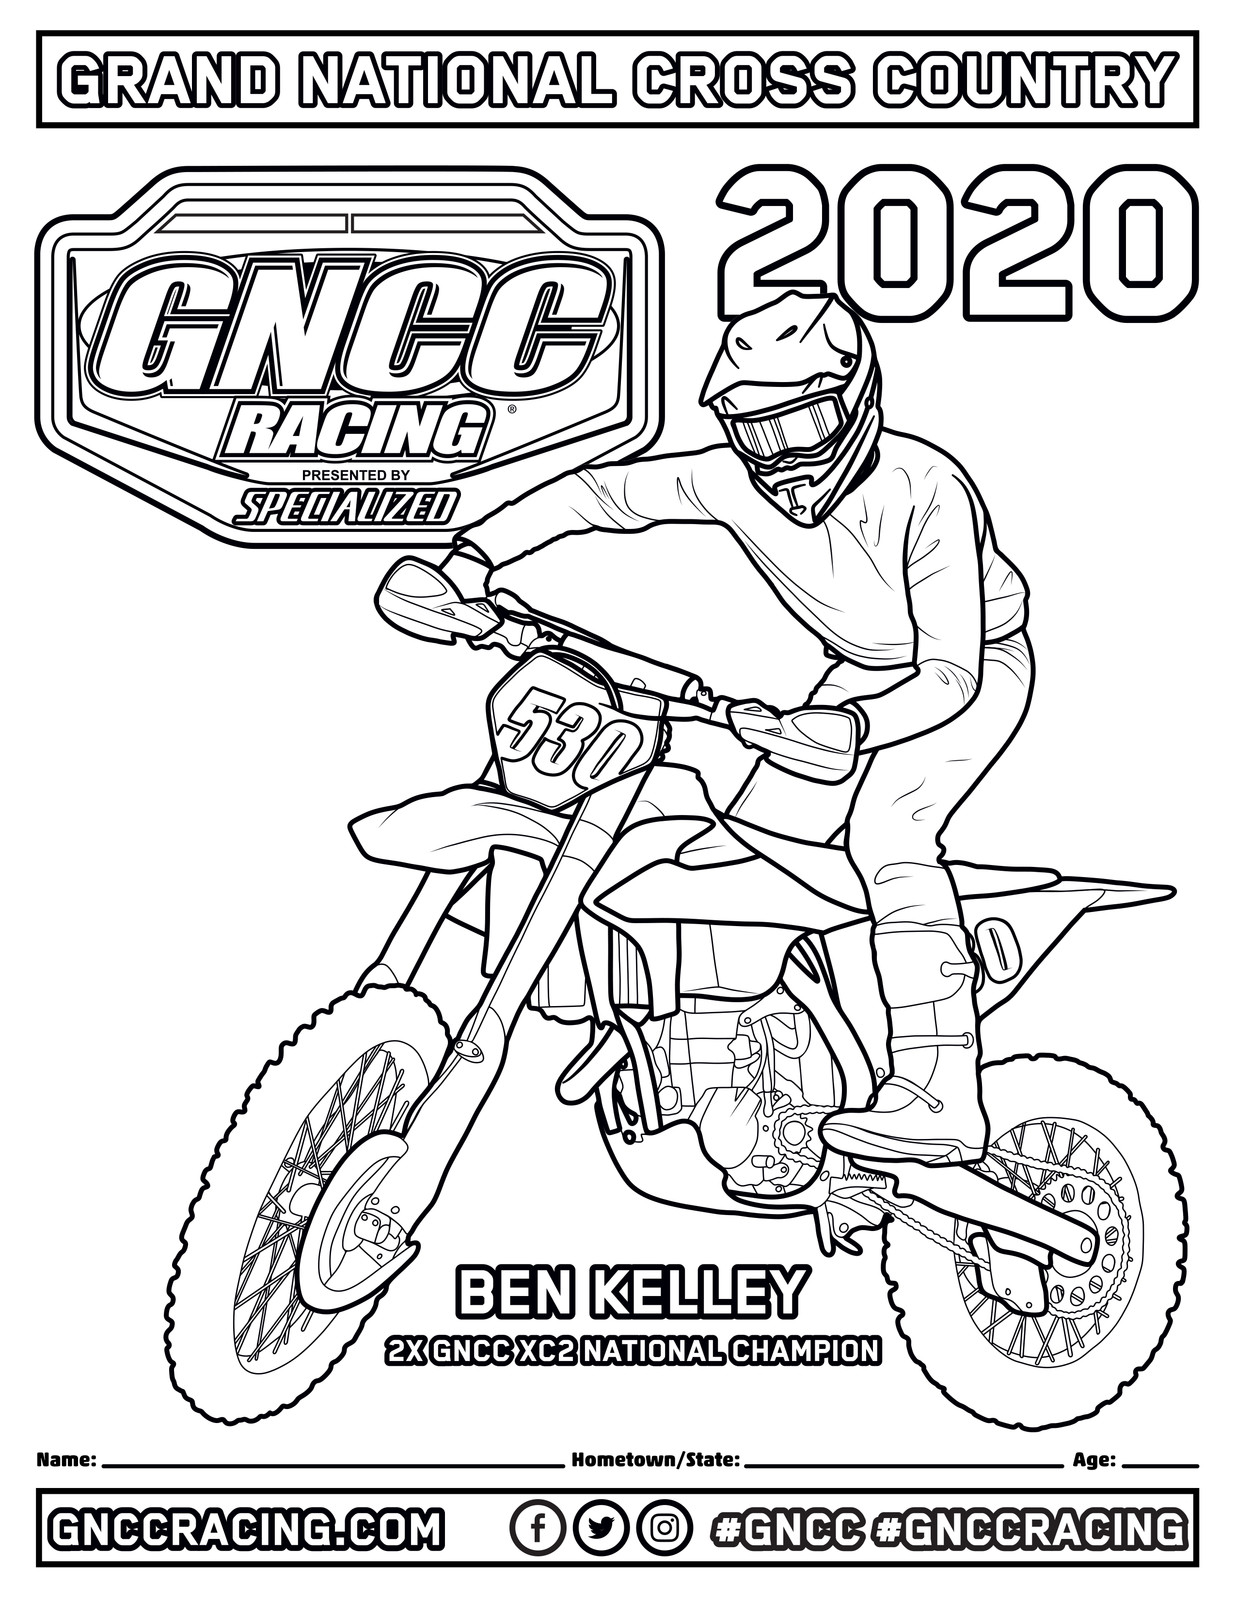 Download Kids Going Crazy? Here Are Fresh GNCC Coloring Pages - GNCC Racing - Racer X